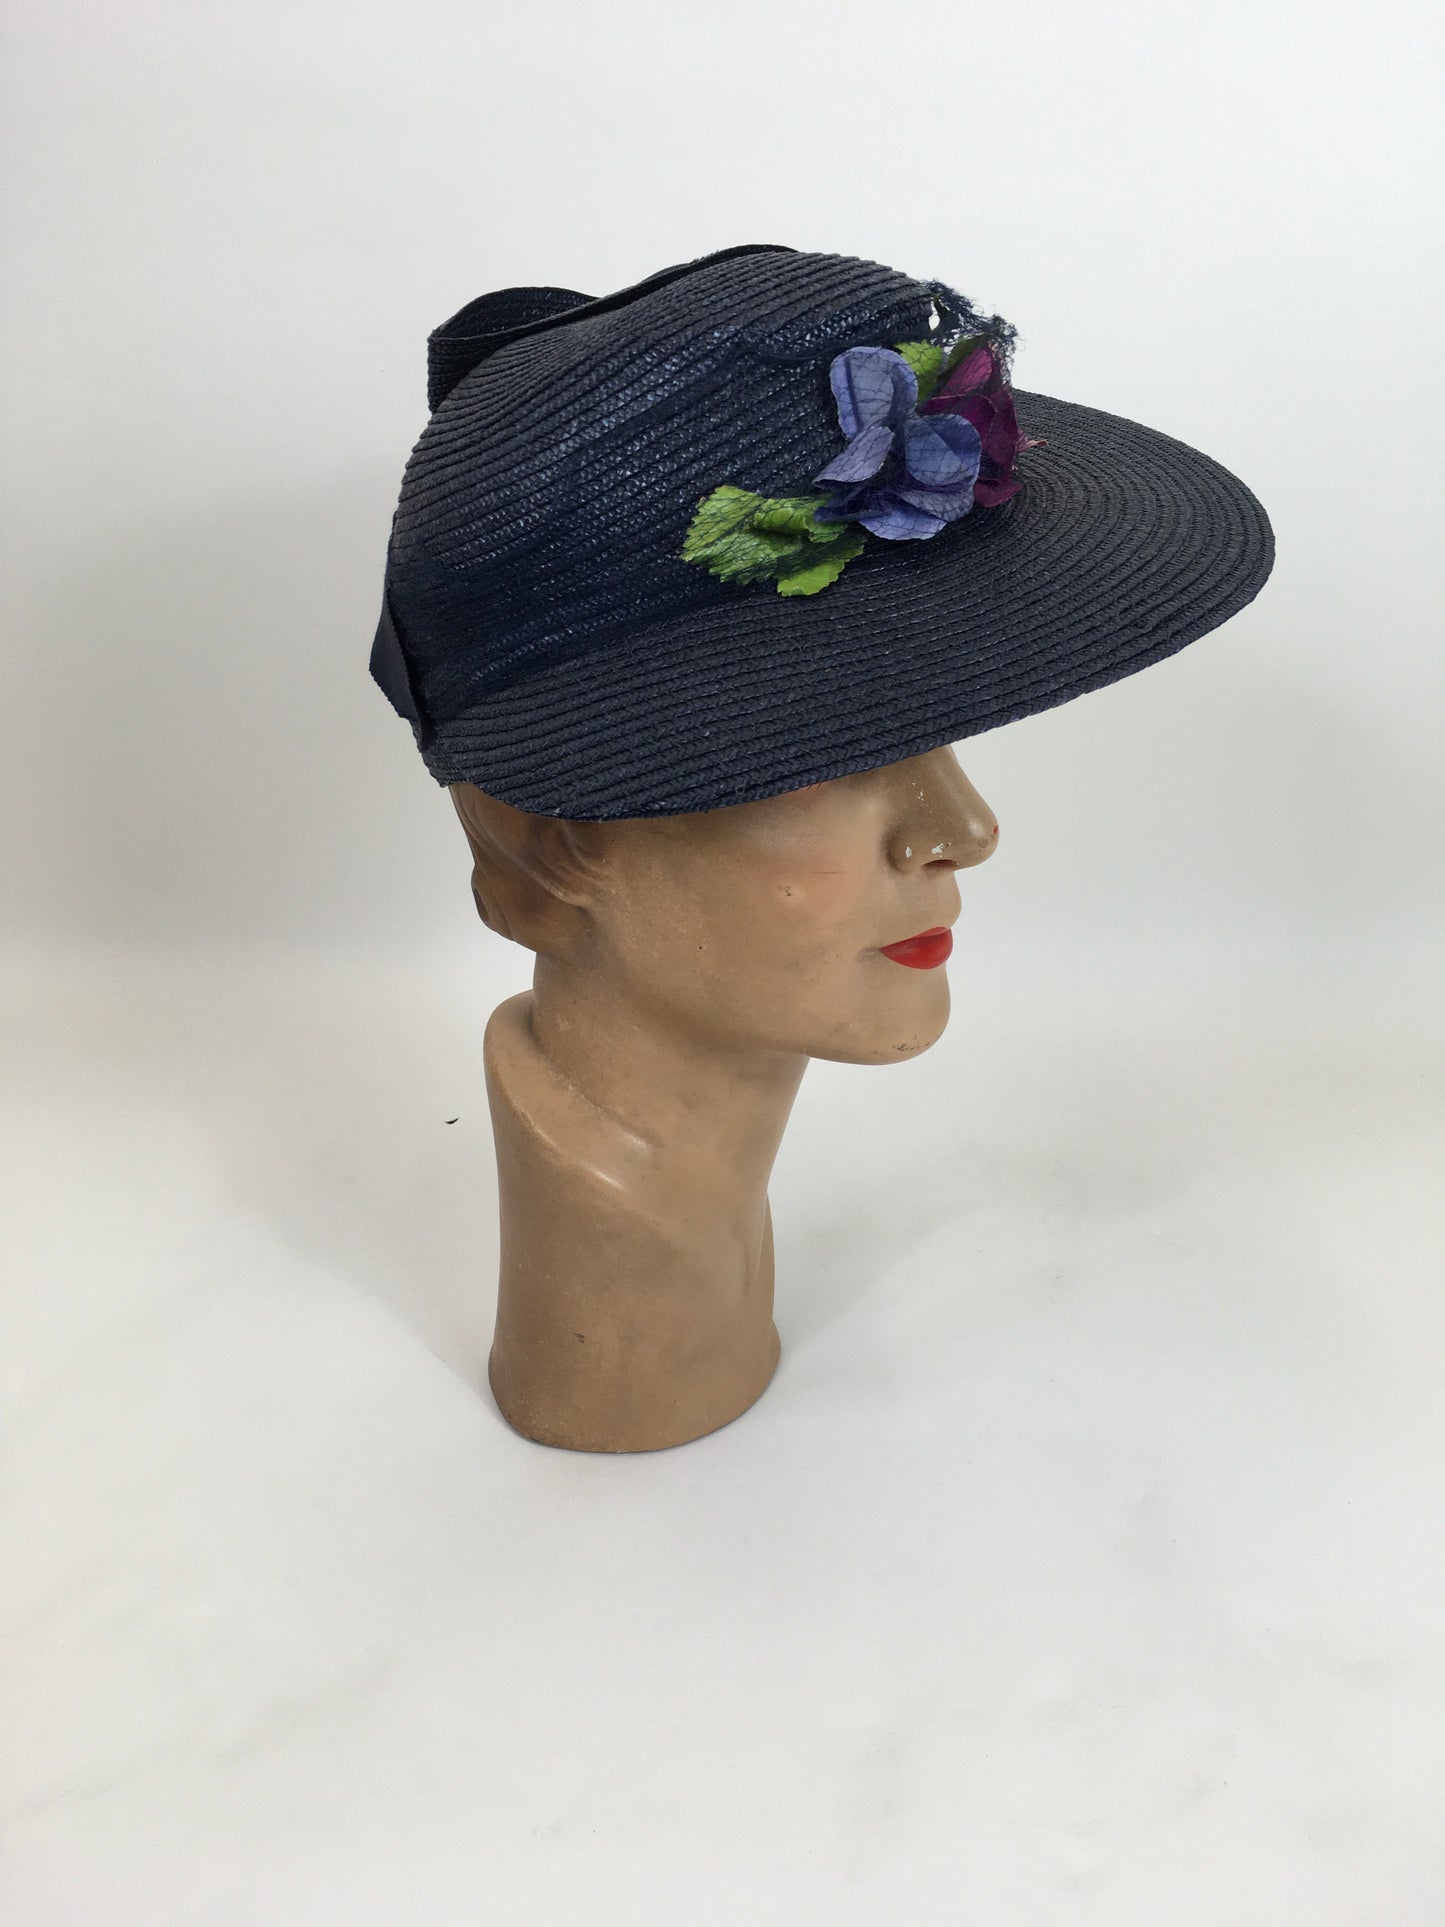 Original 1930’s Stunning Straw Hat  - In A Deep Navy With Florals